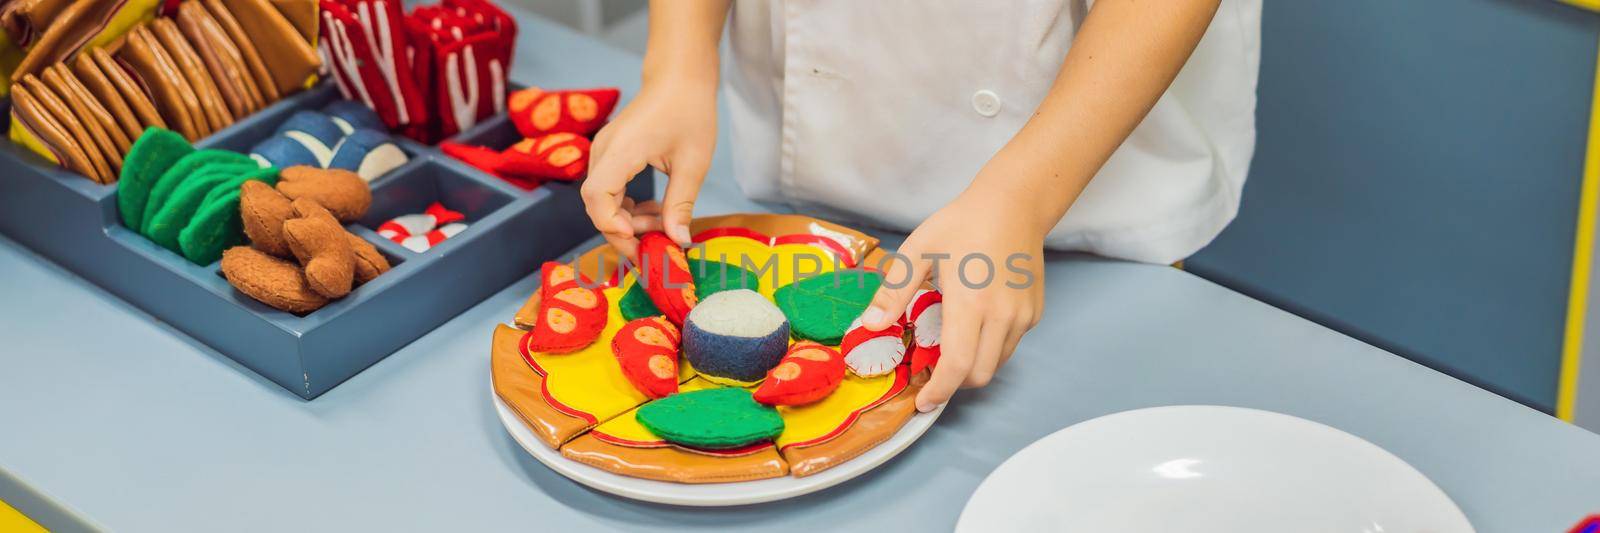 The boy plays in the toy kitchen, cooks a pizza. BANNER, LONG FORMAT